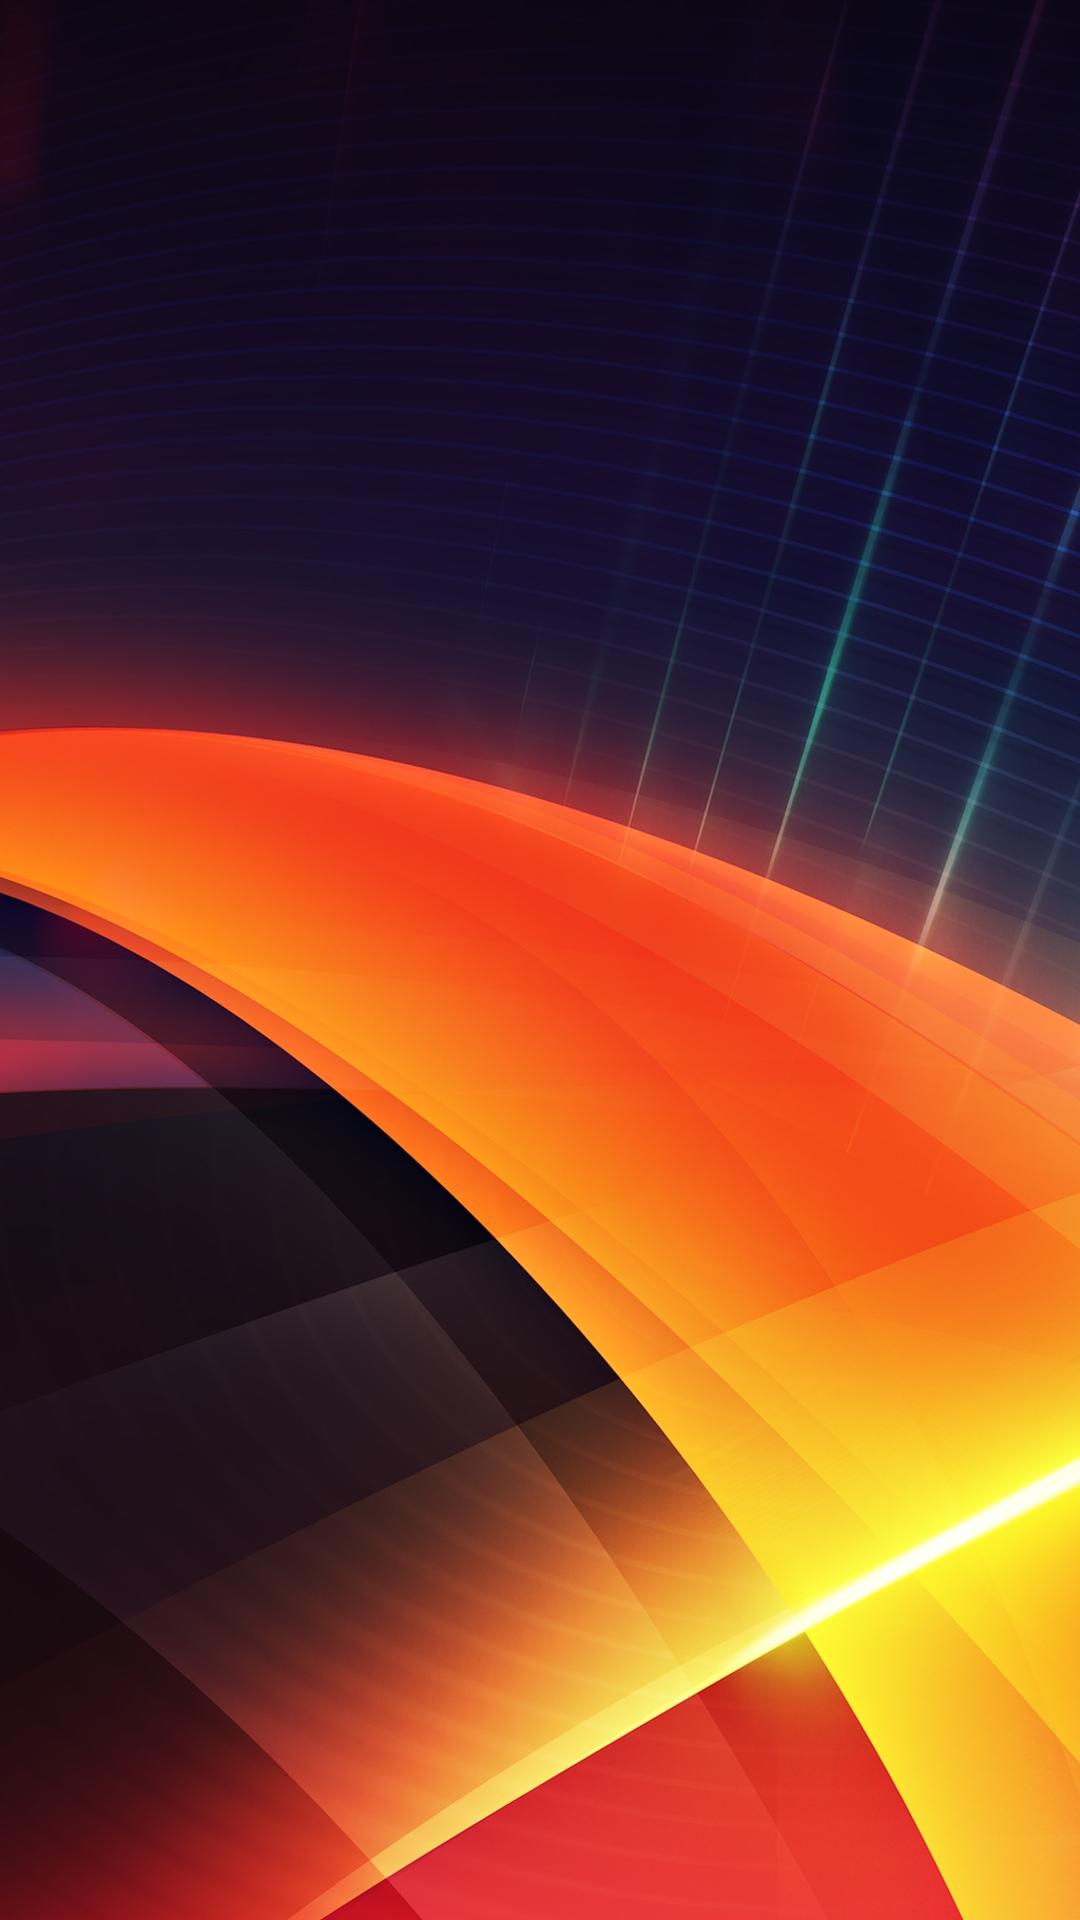 Abstract Orange Layers Android Wallpaper free download